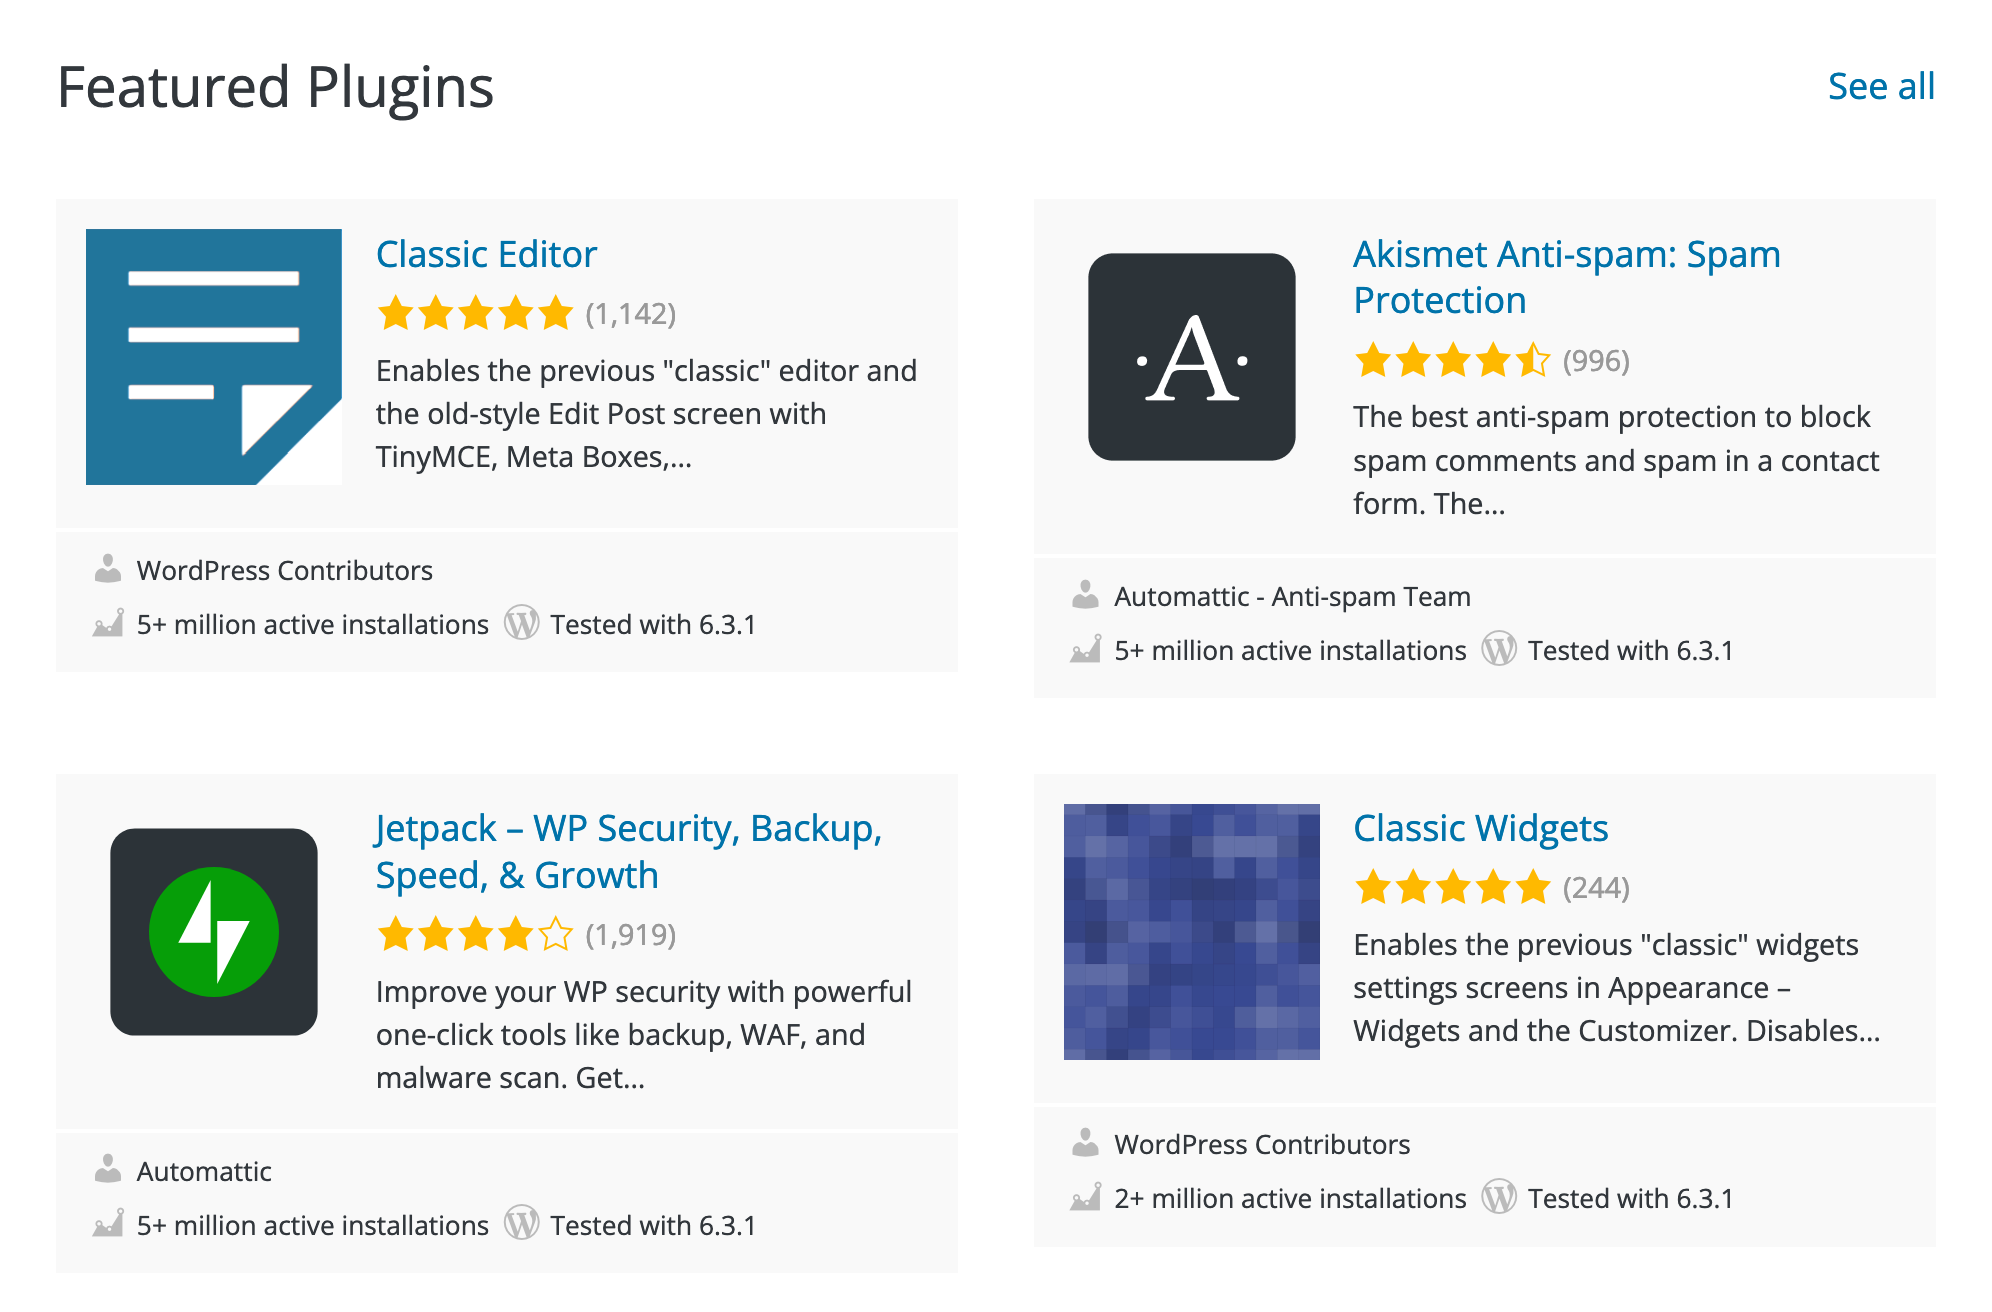 Featured plugins in the official WordPress plugin directory.